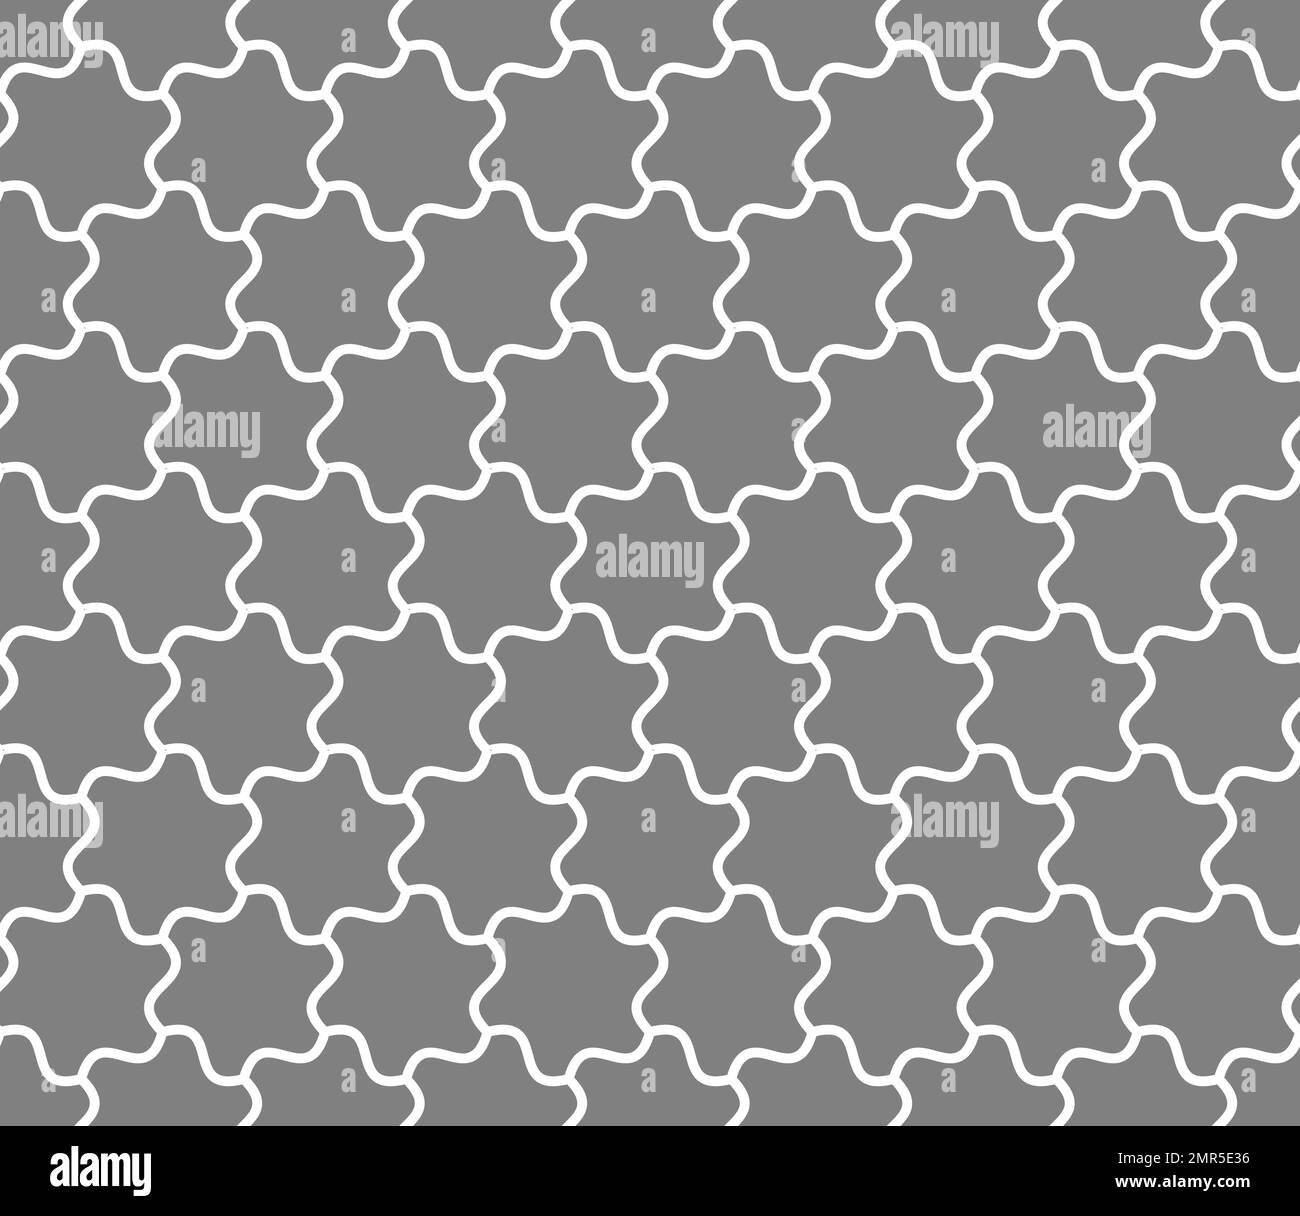 Seamless background of curved hexagons Stock Vector